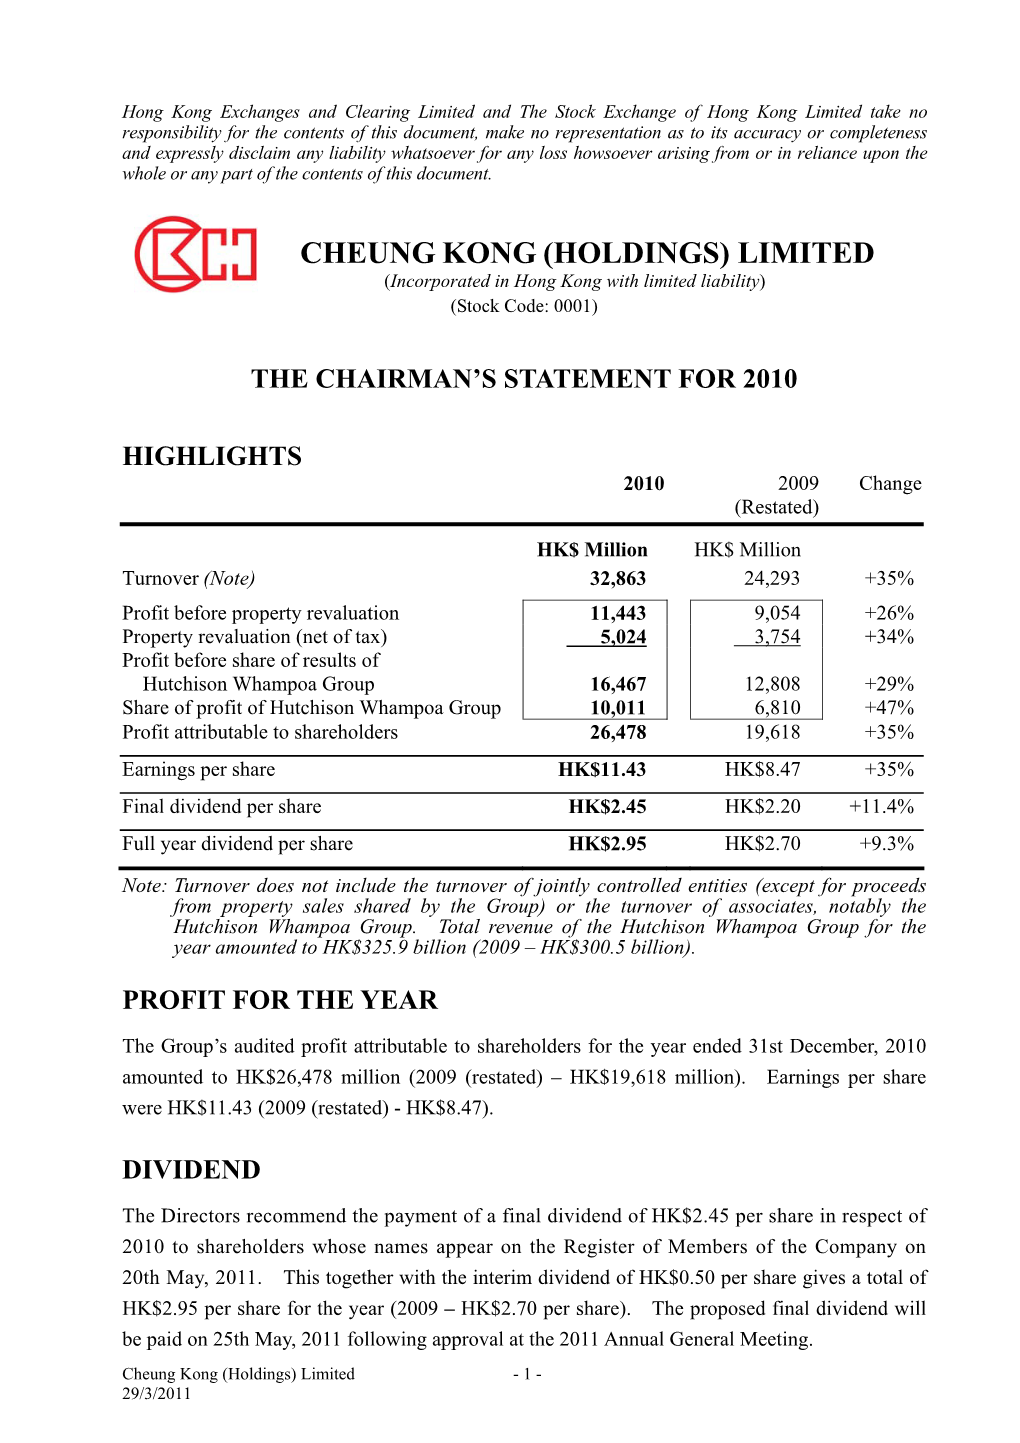 CHEUNG KONG (HOLDINGS) LIMITED (Incorporated in Hong Kong with Limited Liability) (Stock Code: 0001)